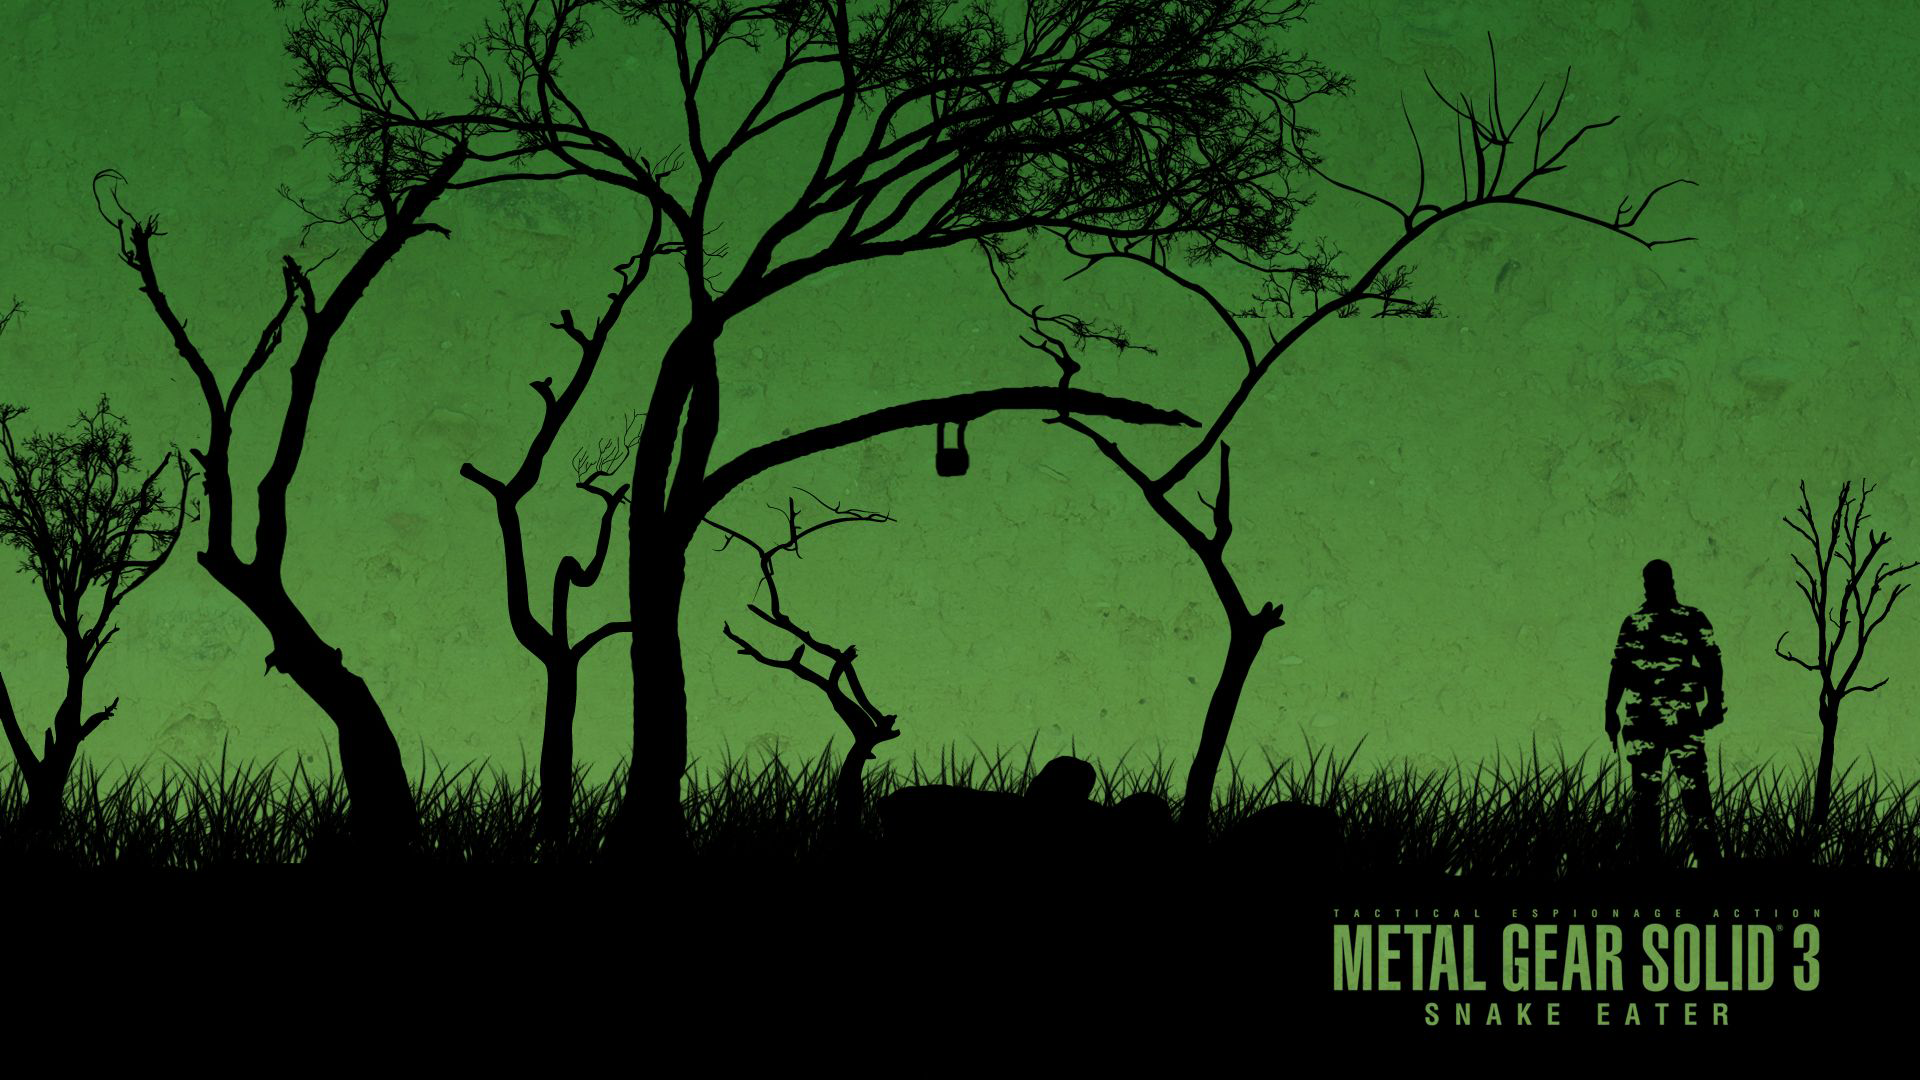 13 Metal Gear Solid 3 Snake Eater HD Wallpapers Backgrounds